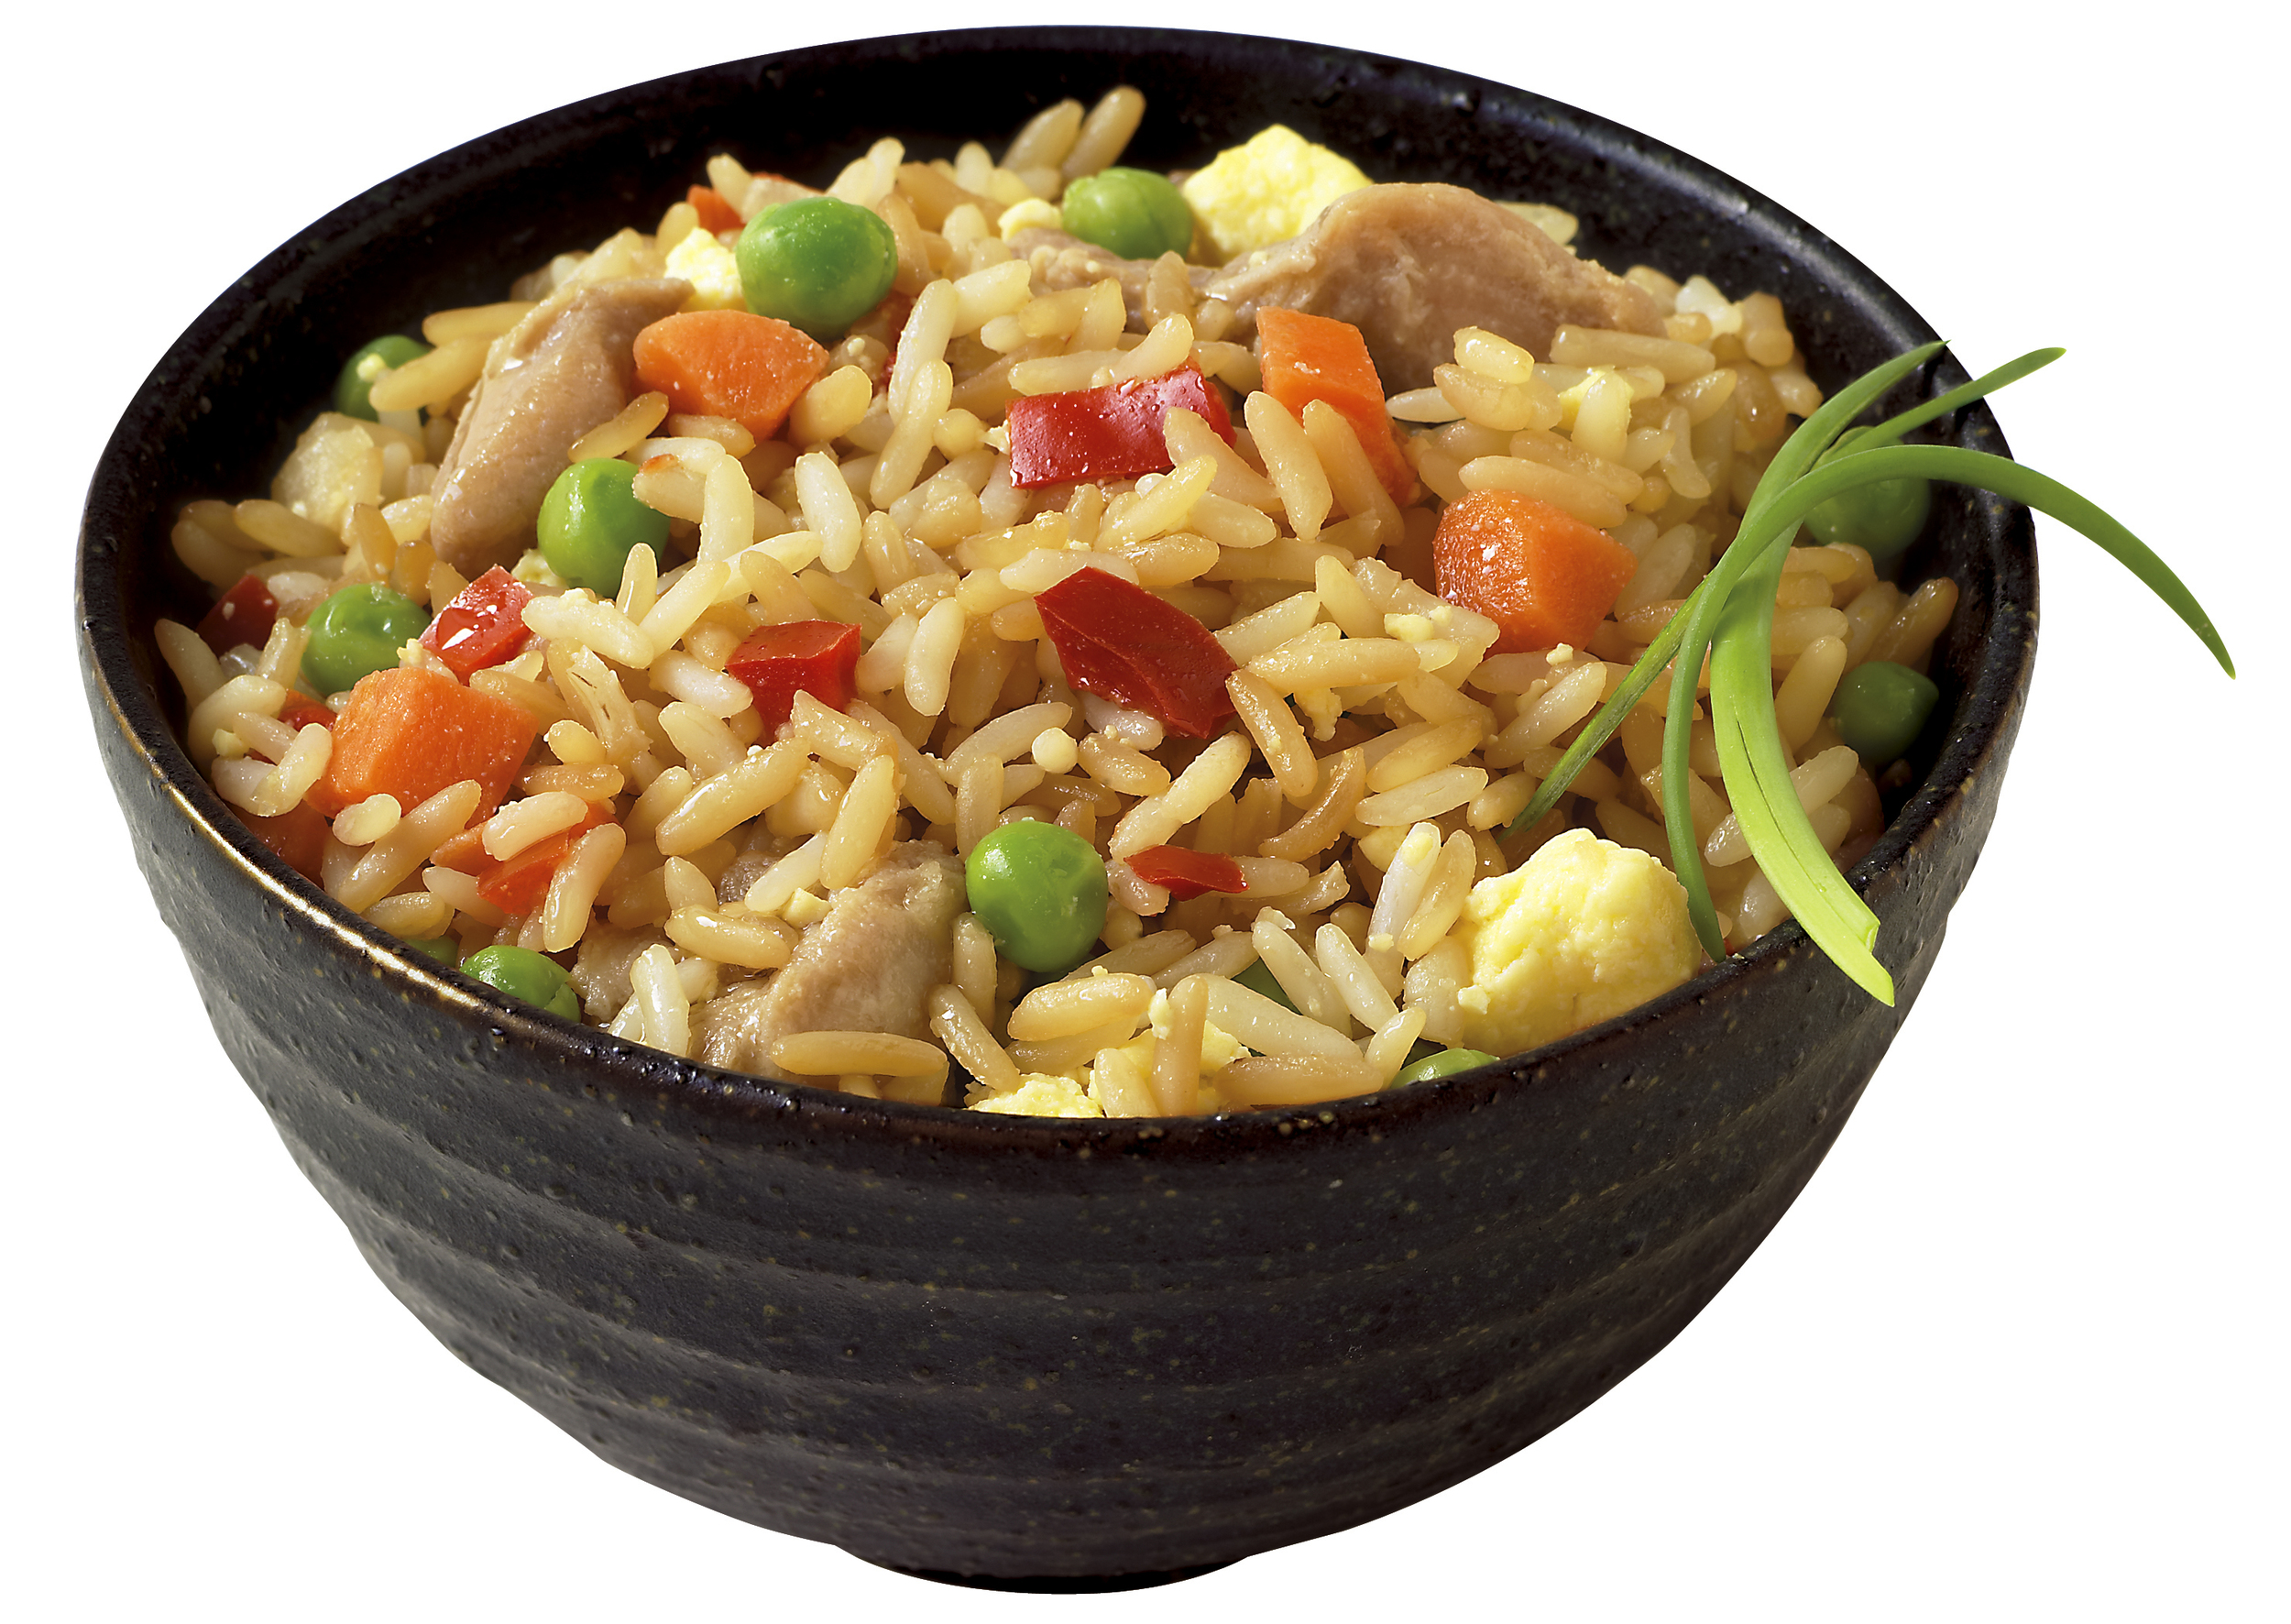  Client: Carrie Sloat / Annie's  Assignment: Retouch image, add rice grains as per designers instruction. 